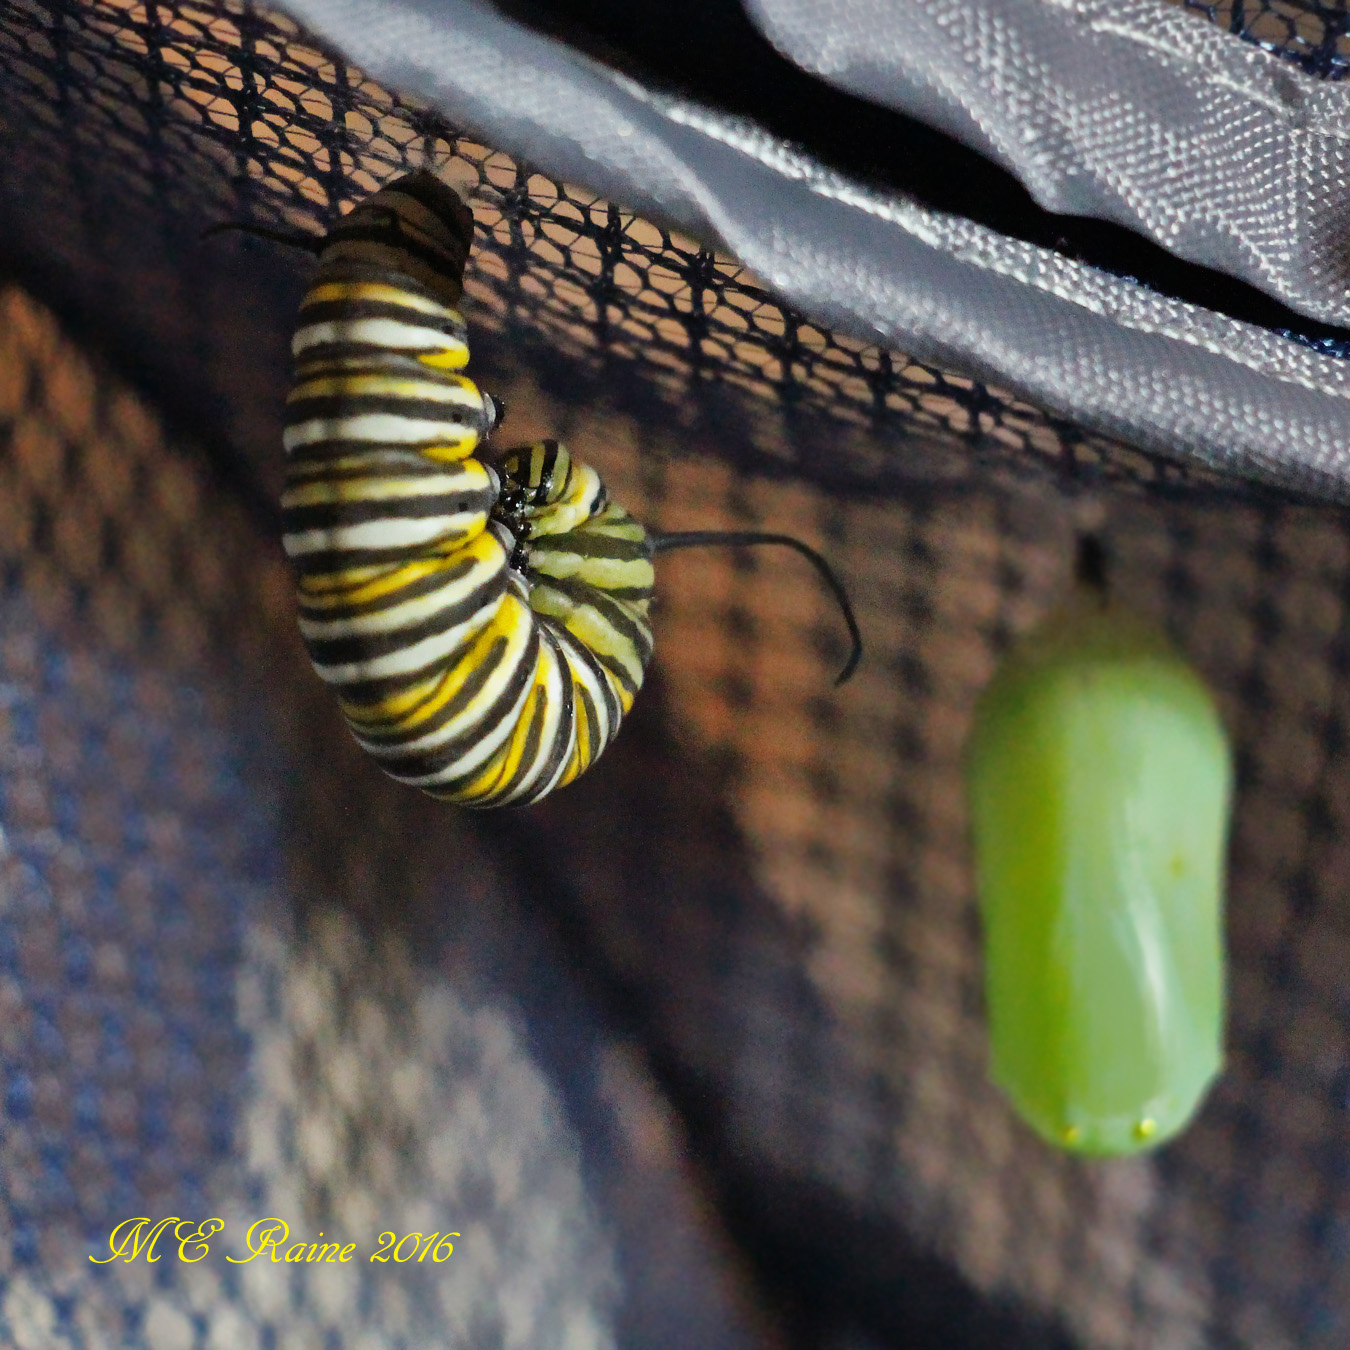 monarch-butterfly-with-chrysalsisno-2-pre-chrysalis-stage-safe-house-1-090716-near-mdnght-ok-wm-2